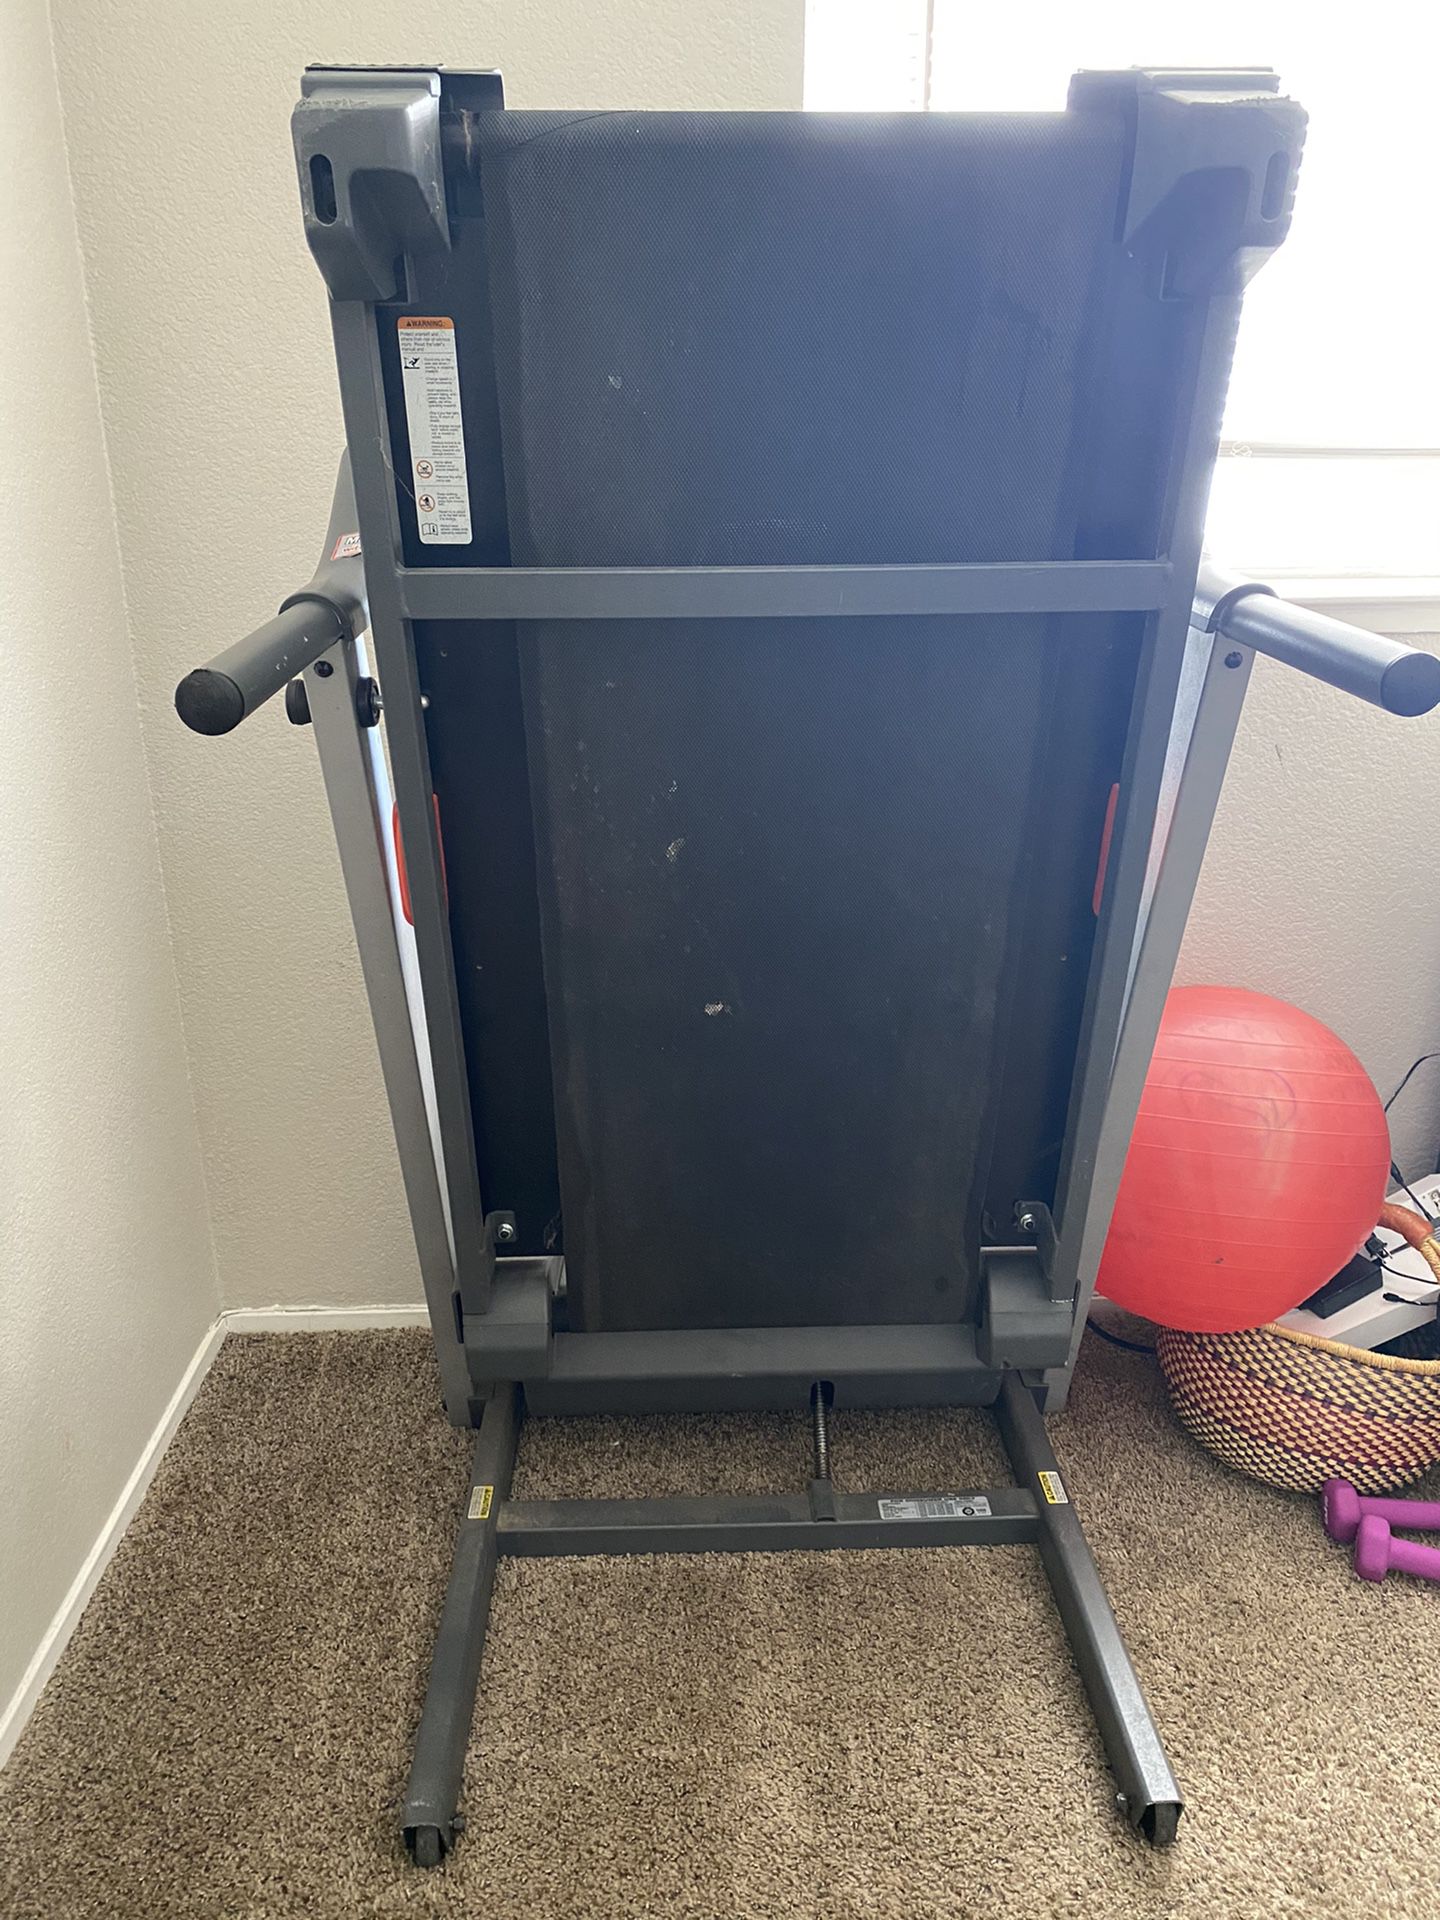 Treadmill and bicycle workout machine